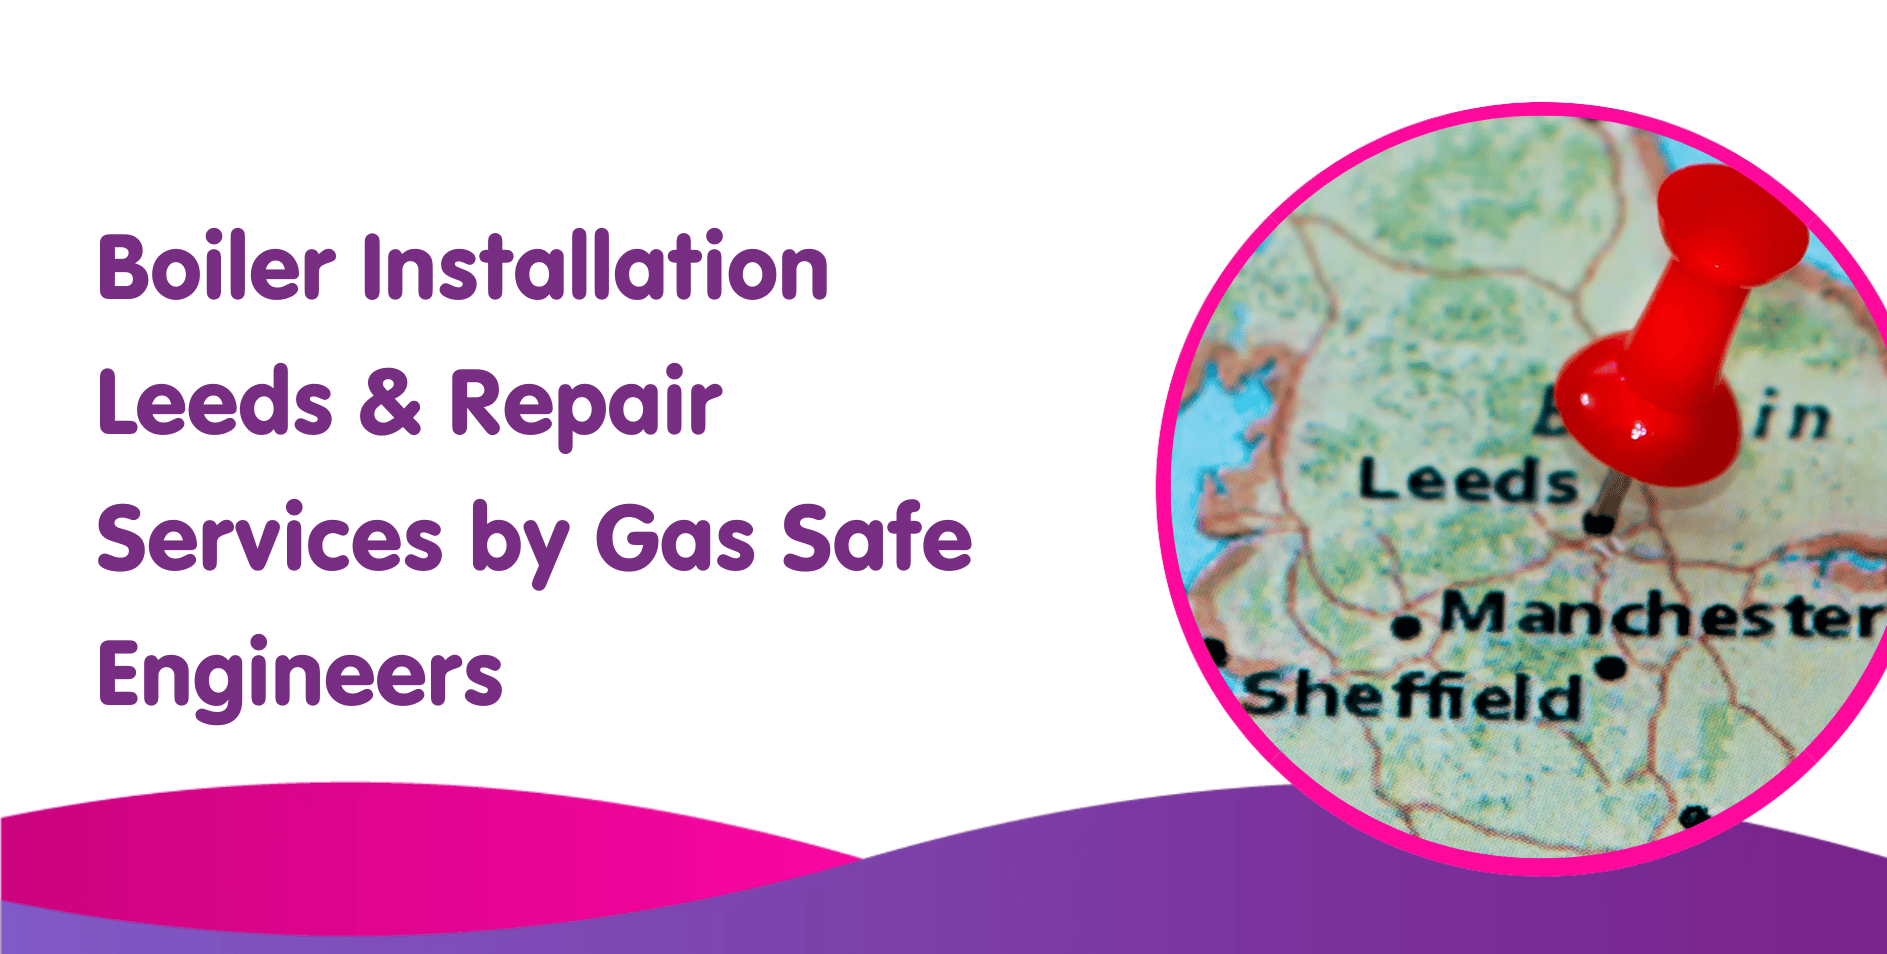 Boiler Installation Leeds & Repair Services by Gas Safe Engineers